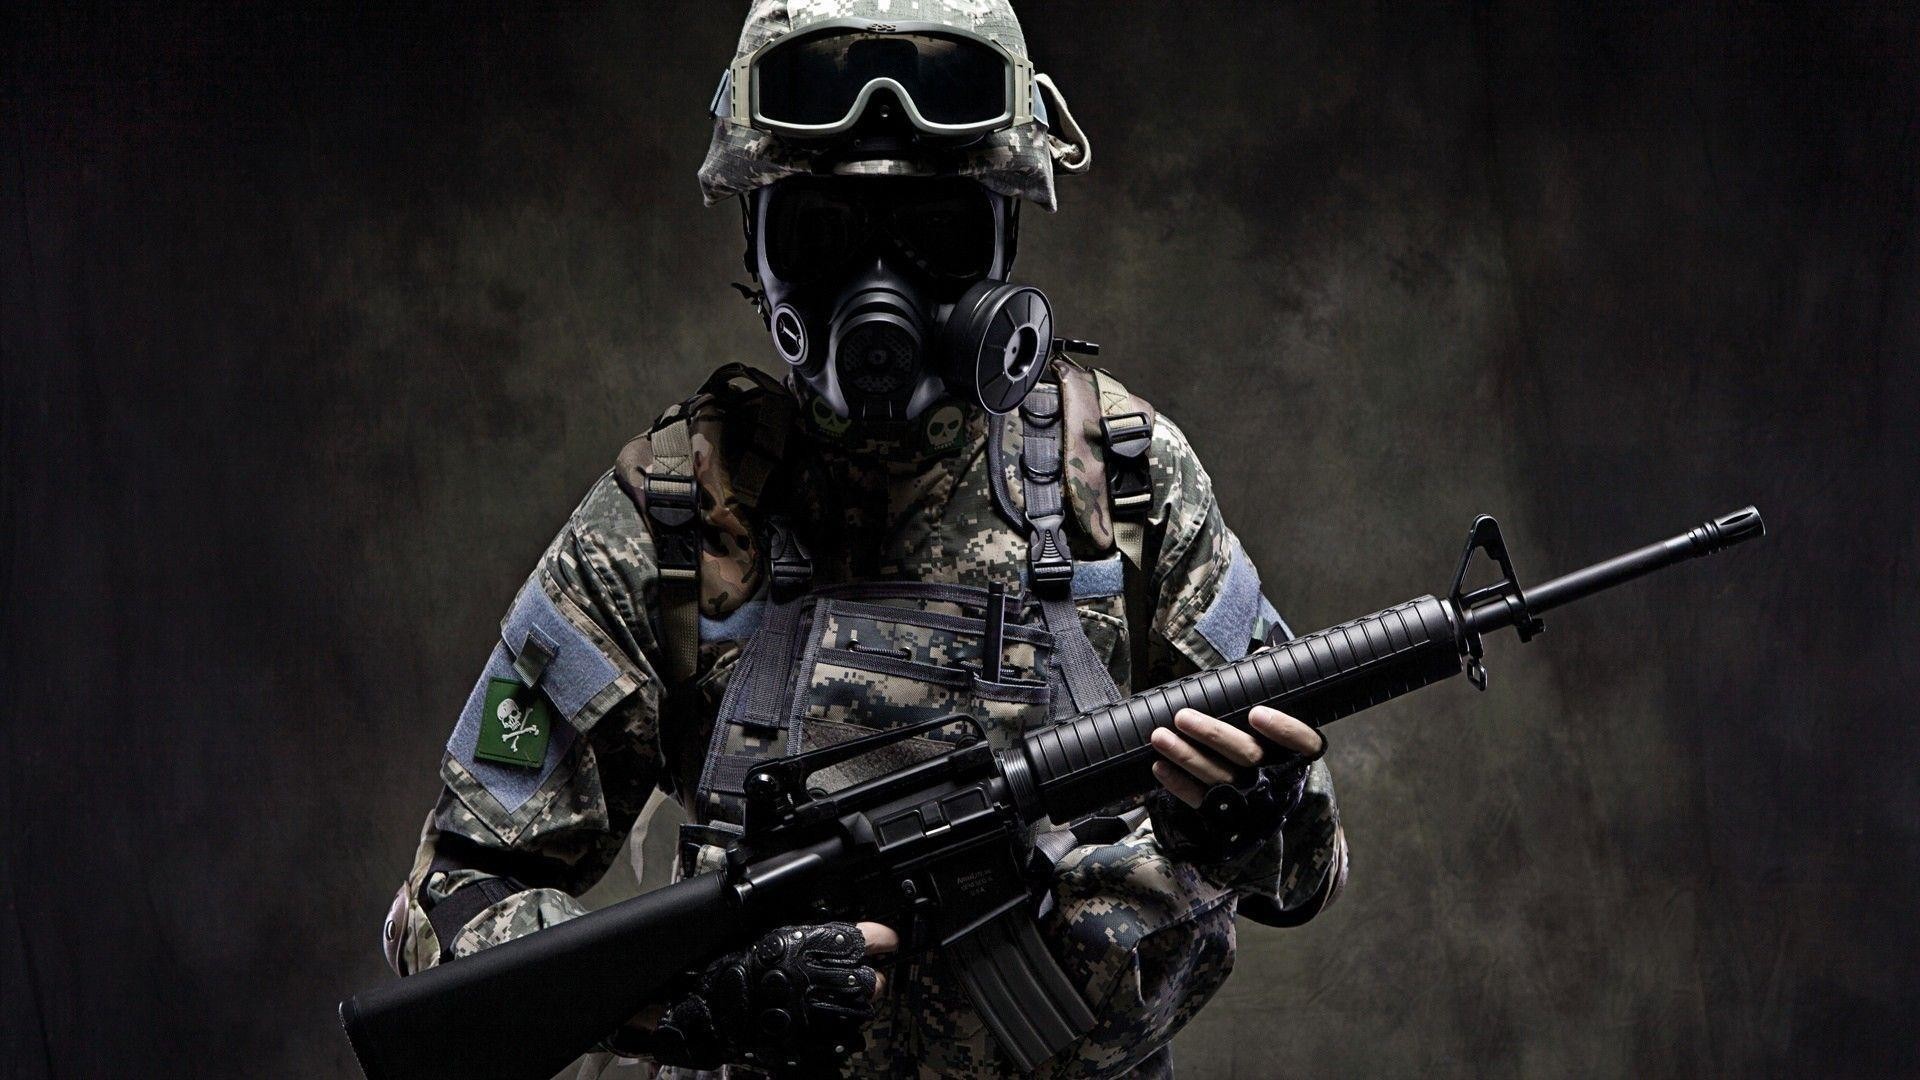 1920x1080 ... Similiar Us Military Special Forces Wallpaper Keywords